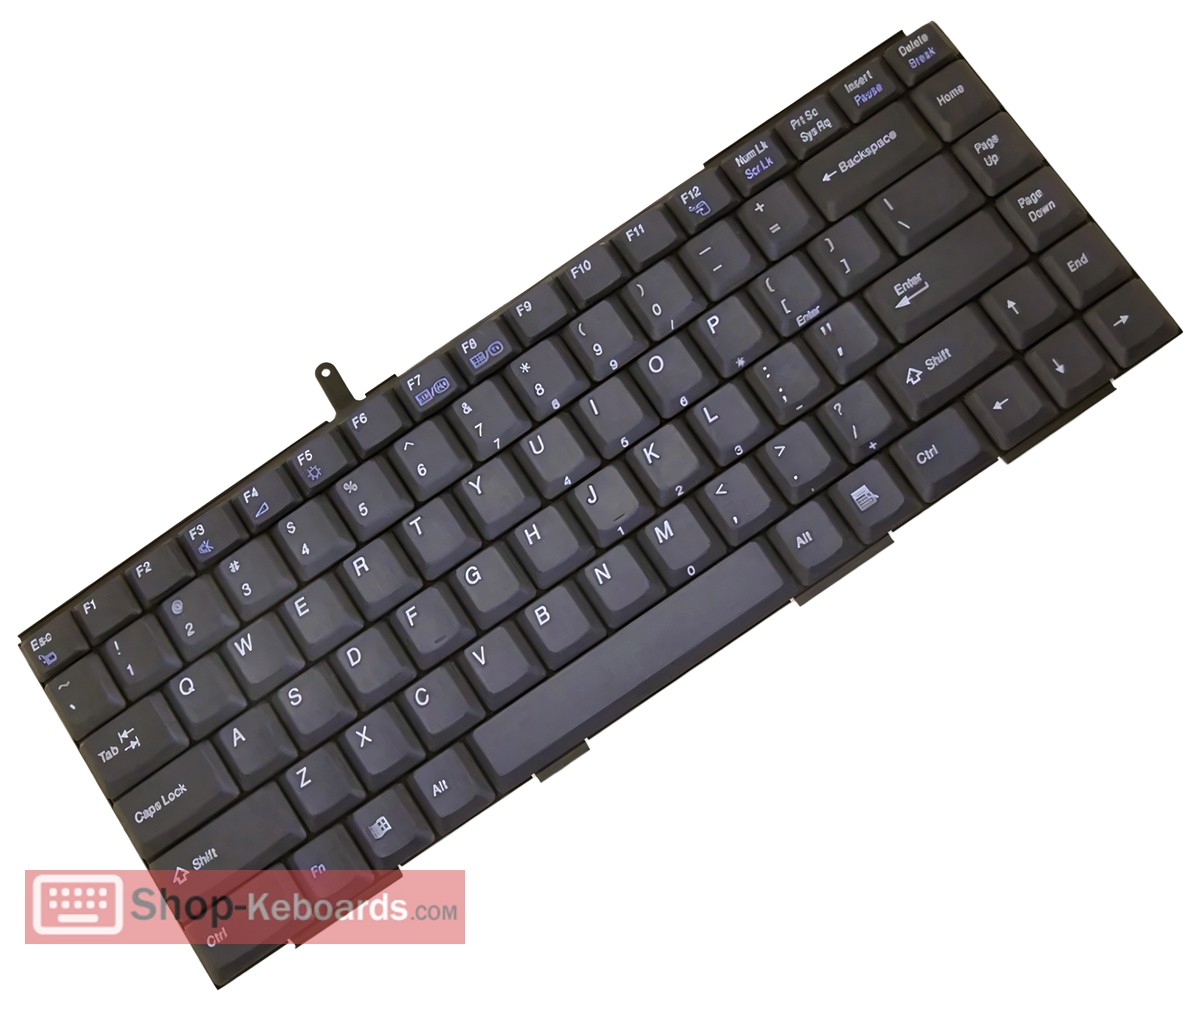 Sony VAIO PCG-F390 Keyboard replacement